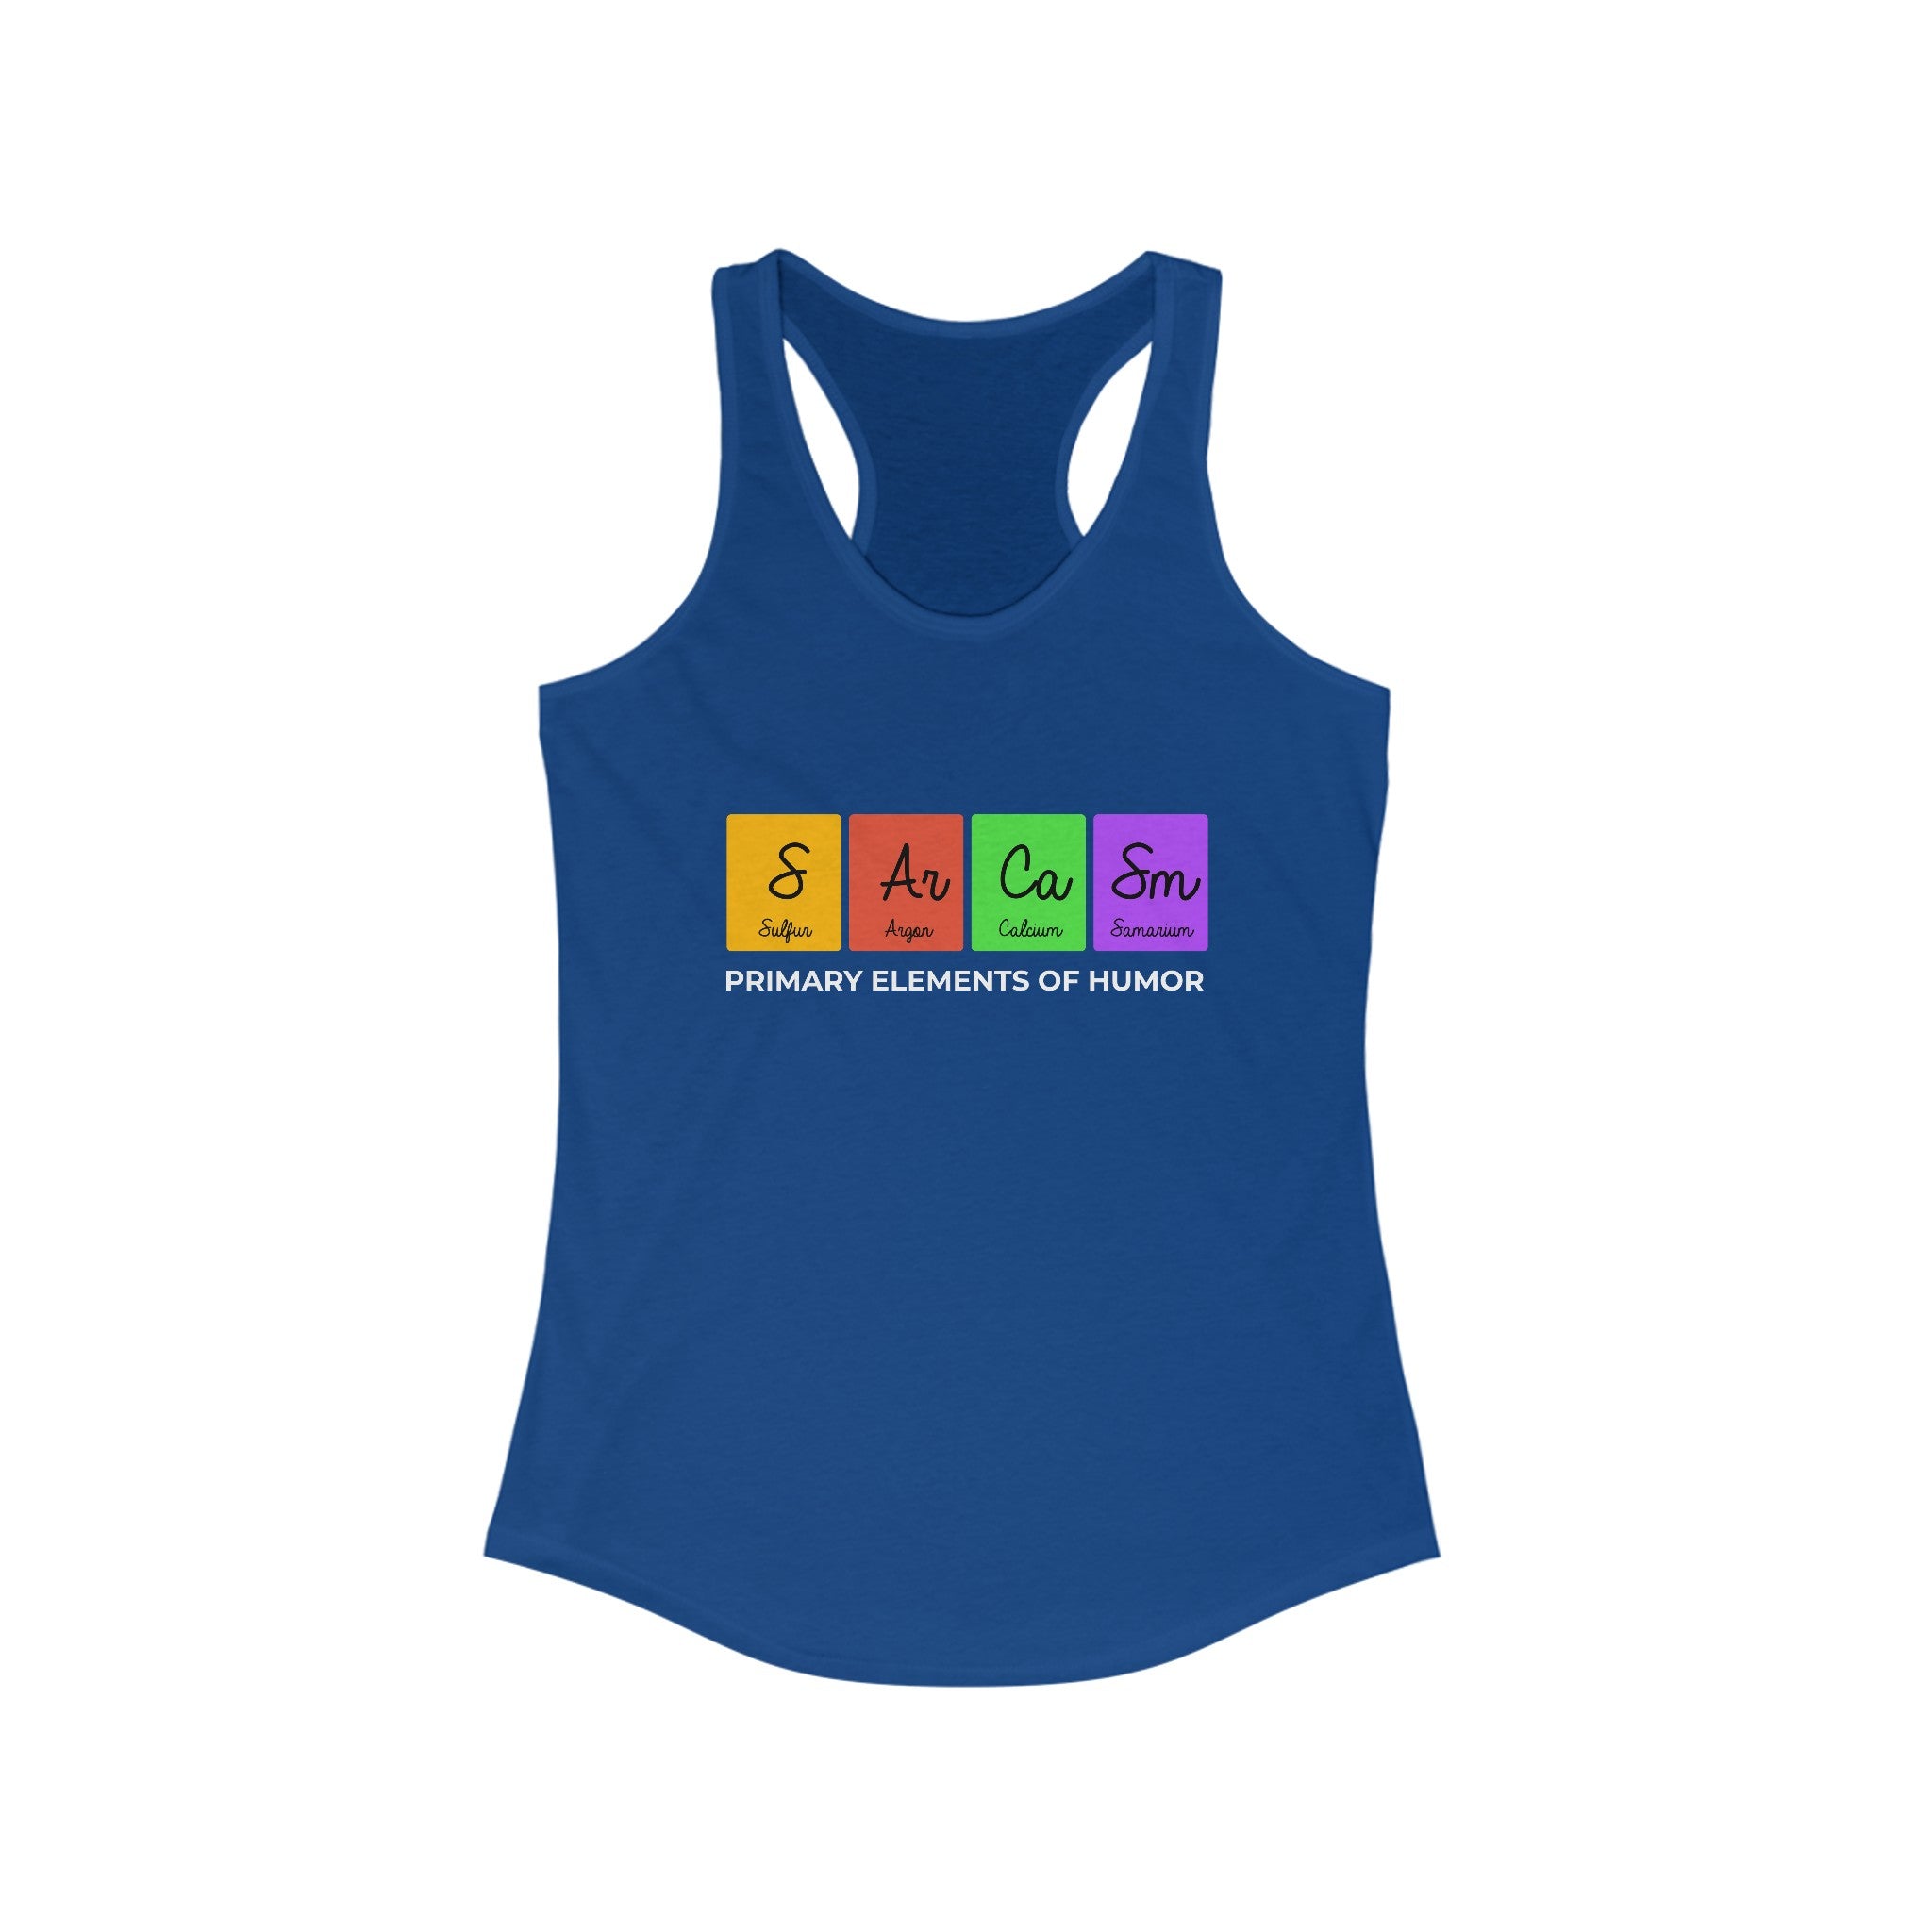 S-Ar-Ca-Sm - Women's Racerback Tank: Blue racerback tank top with a lightweight design resembling elements from the periodic table spelling out "Sarcasm" and the phrase "Primary Elements of Humor." Perfect for an active life.